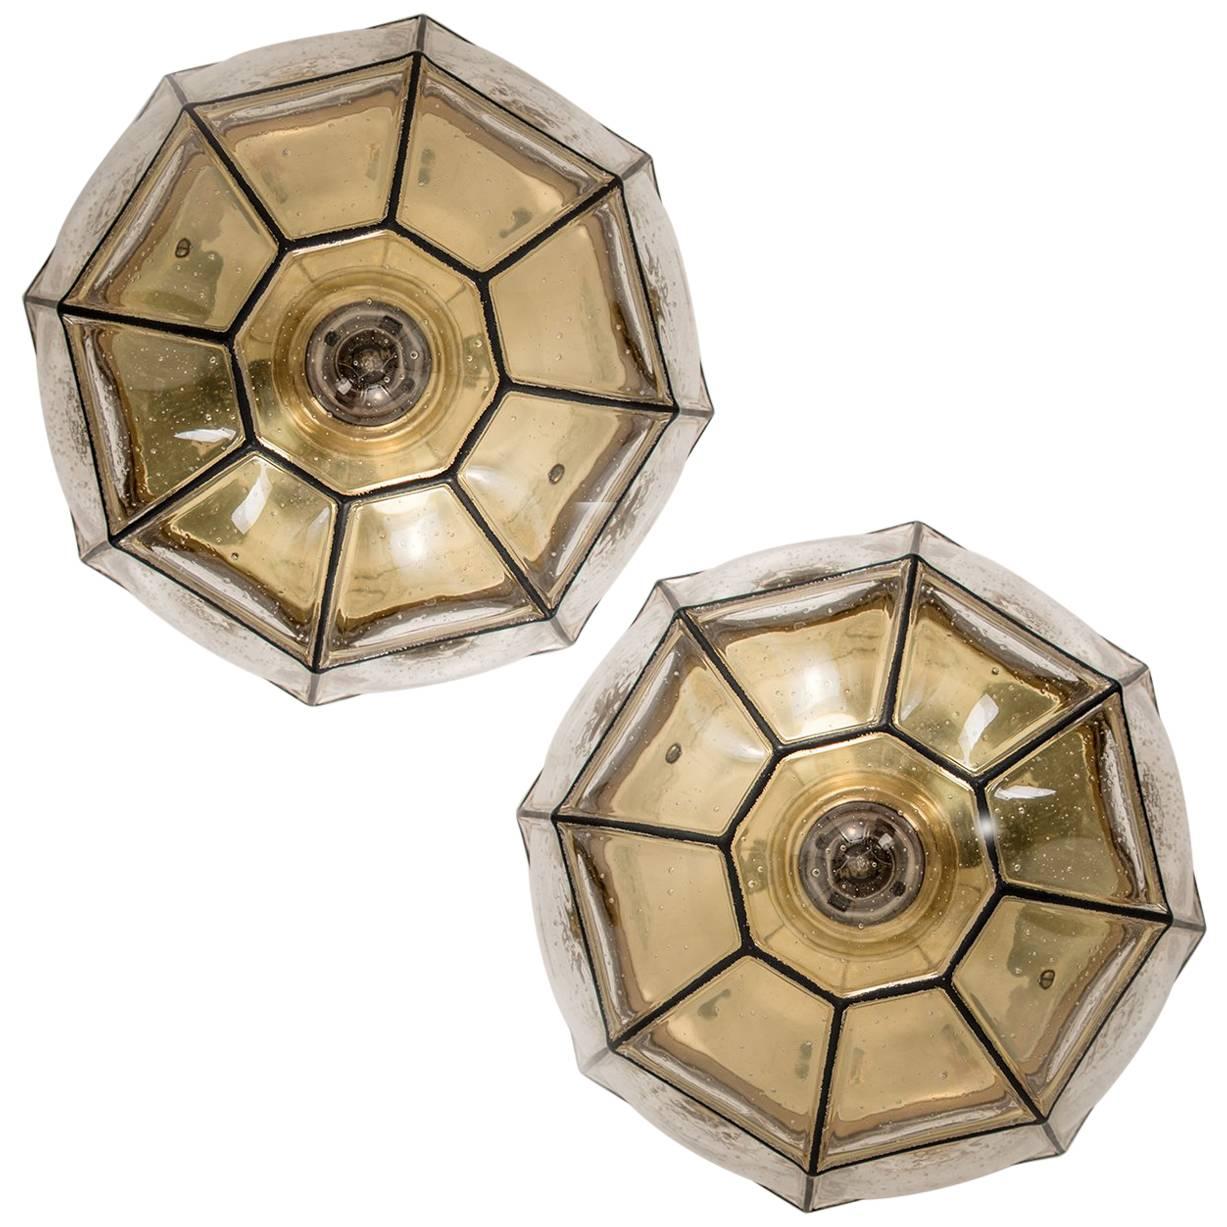 This beautiful and unique octagonal set of glass light flushmounts or wall lights were manufactured by Glashütte Limburg in Germany during the 1960s (late 1960s or early 1970s). Beautiful craftsmanship. Each lamp, made from elaborate clear glass